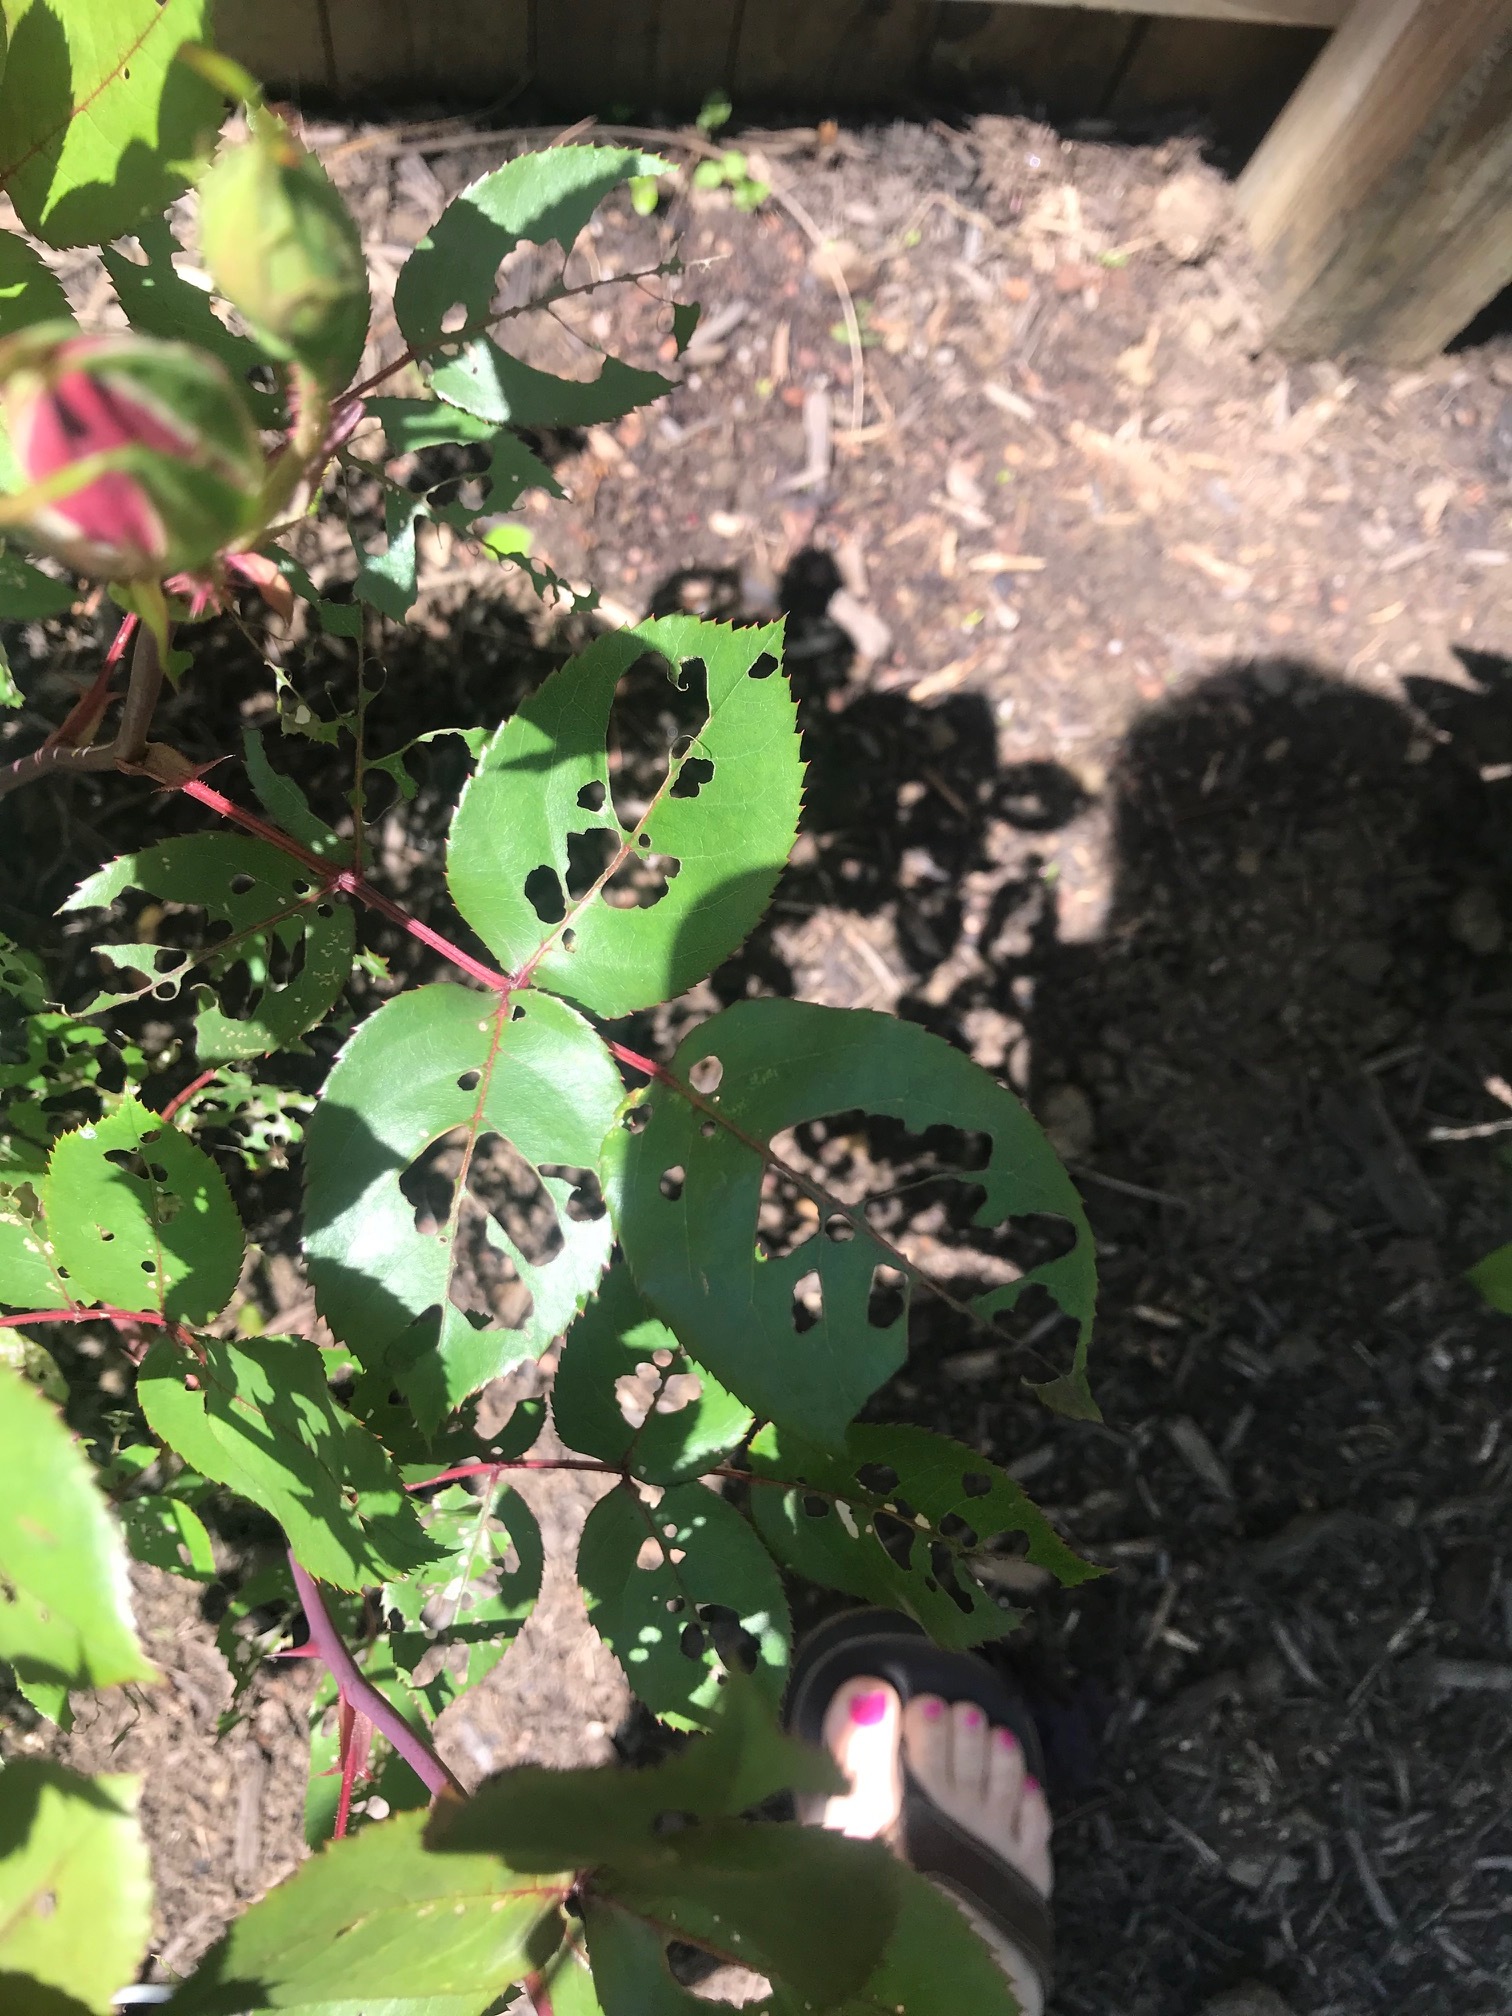 What's eating your rose leaves?